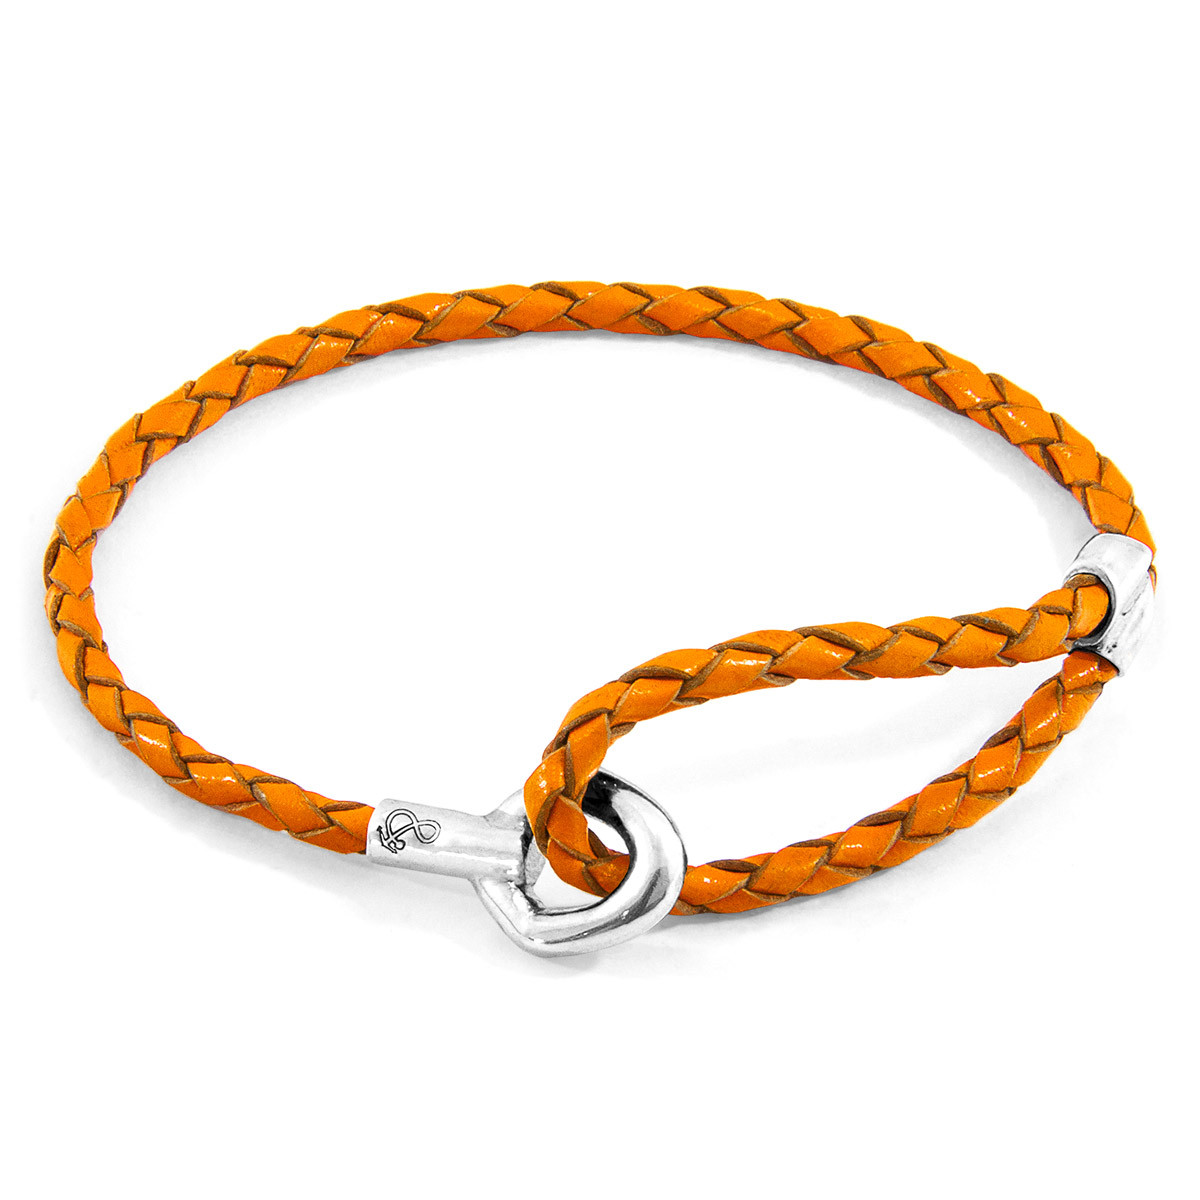 Anchor & Crew Fire Orange Blake Silver and Braided Leather Bracelet 